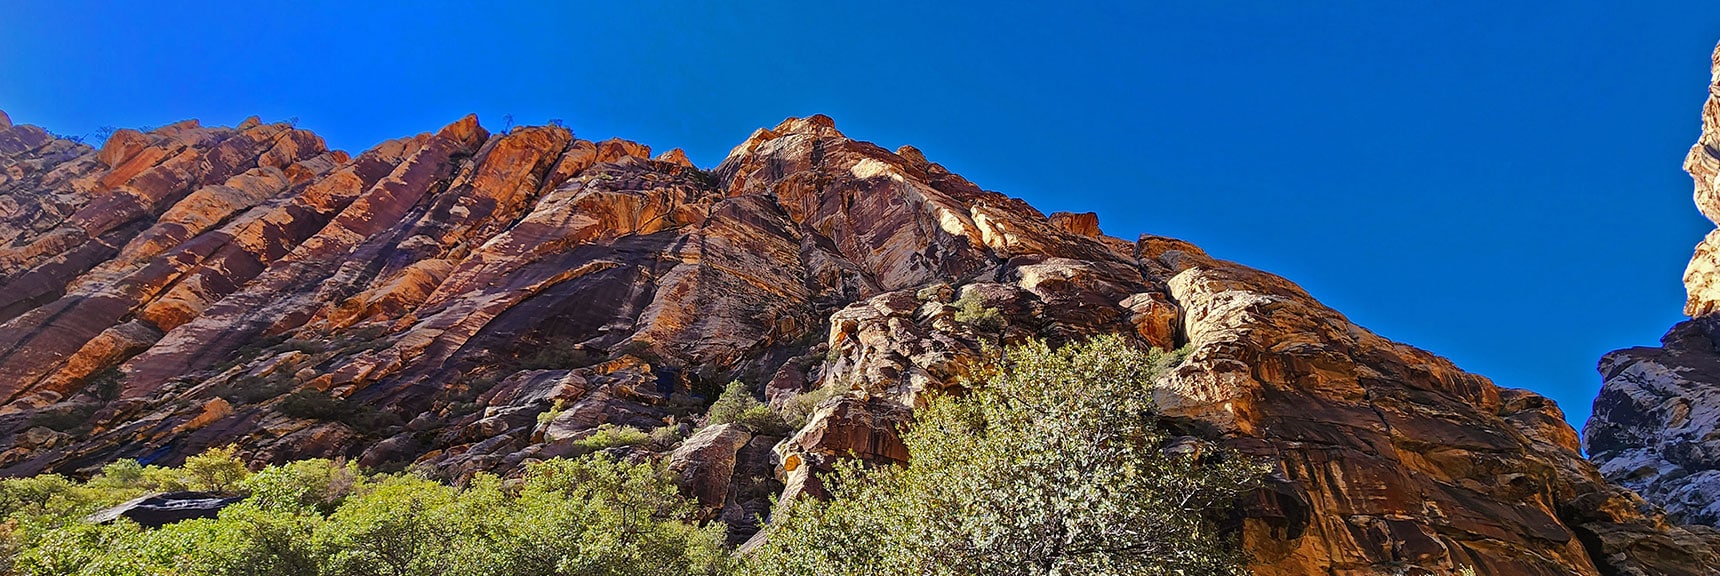 These Canyon Walls Are World Class Rock Climbing Destinations in Other Canyons | Ice Box Canyon | Red Rock Canyon NCA, Nevada | Las Vegas Area Trails | David Smith